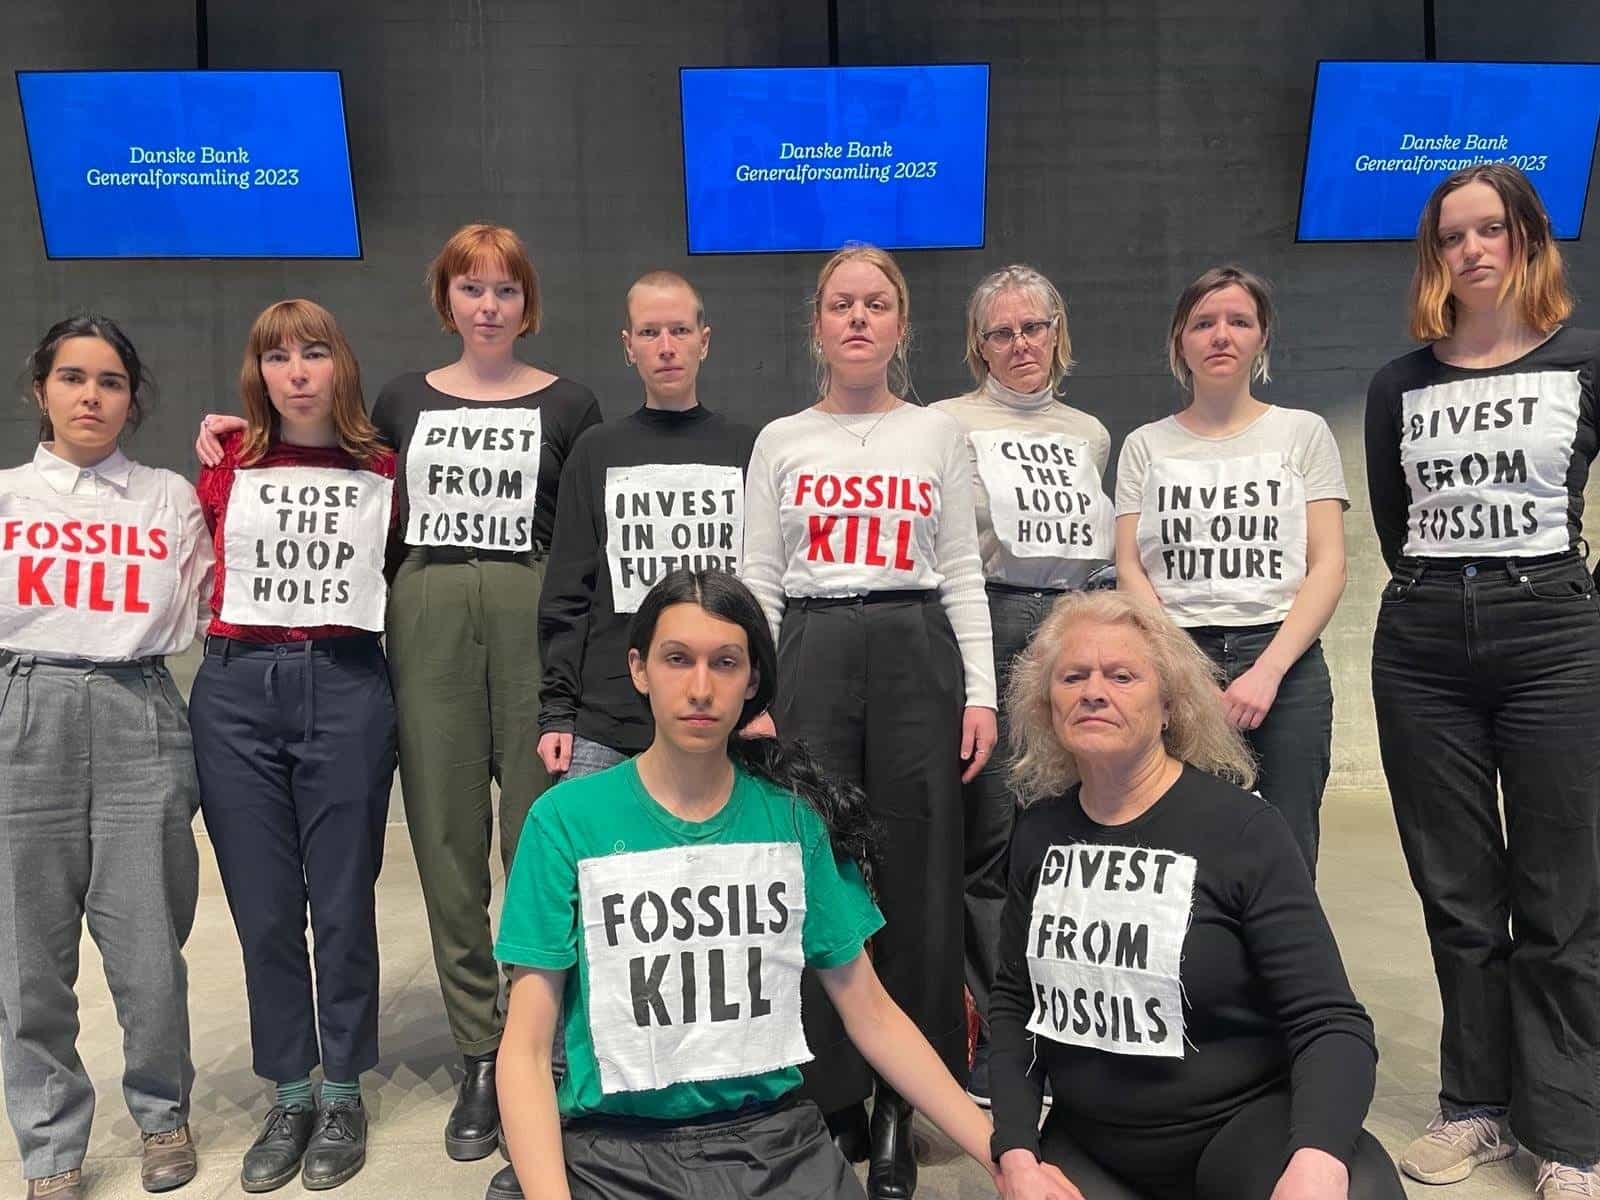 Members of scientist rebellion pose with climate crisis messages pinned to their shirts at a Danske Bank conference